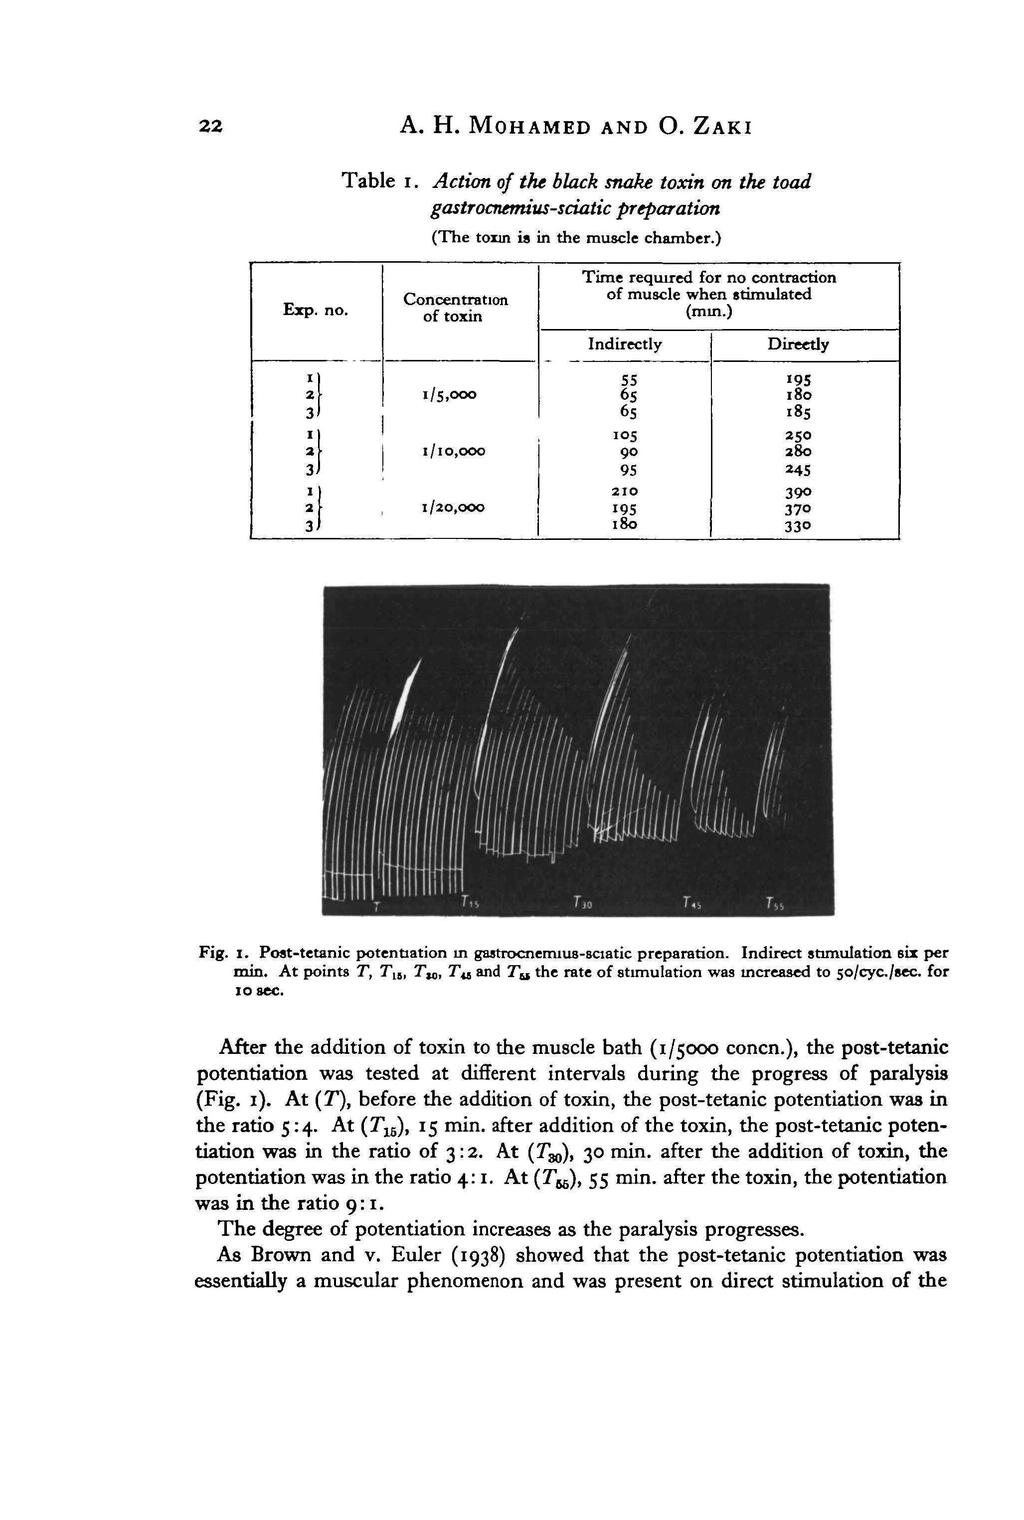 A. H. MOHAMED AND O. Table i. Action of the black snake toxin on the toad gastrocnemius-sciatic preparation (The toxin is in the muscle chamber.) Exp. no. i a i 1 Concentration of toxin i/s.